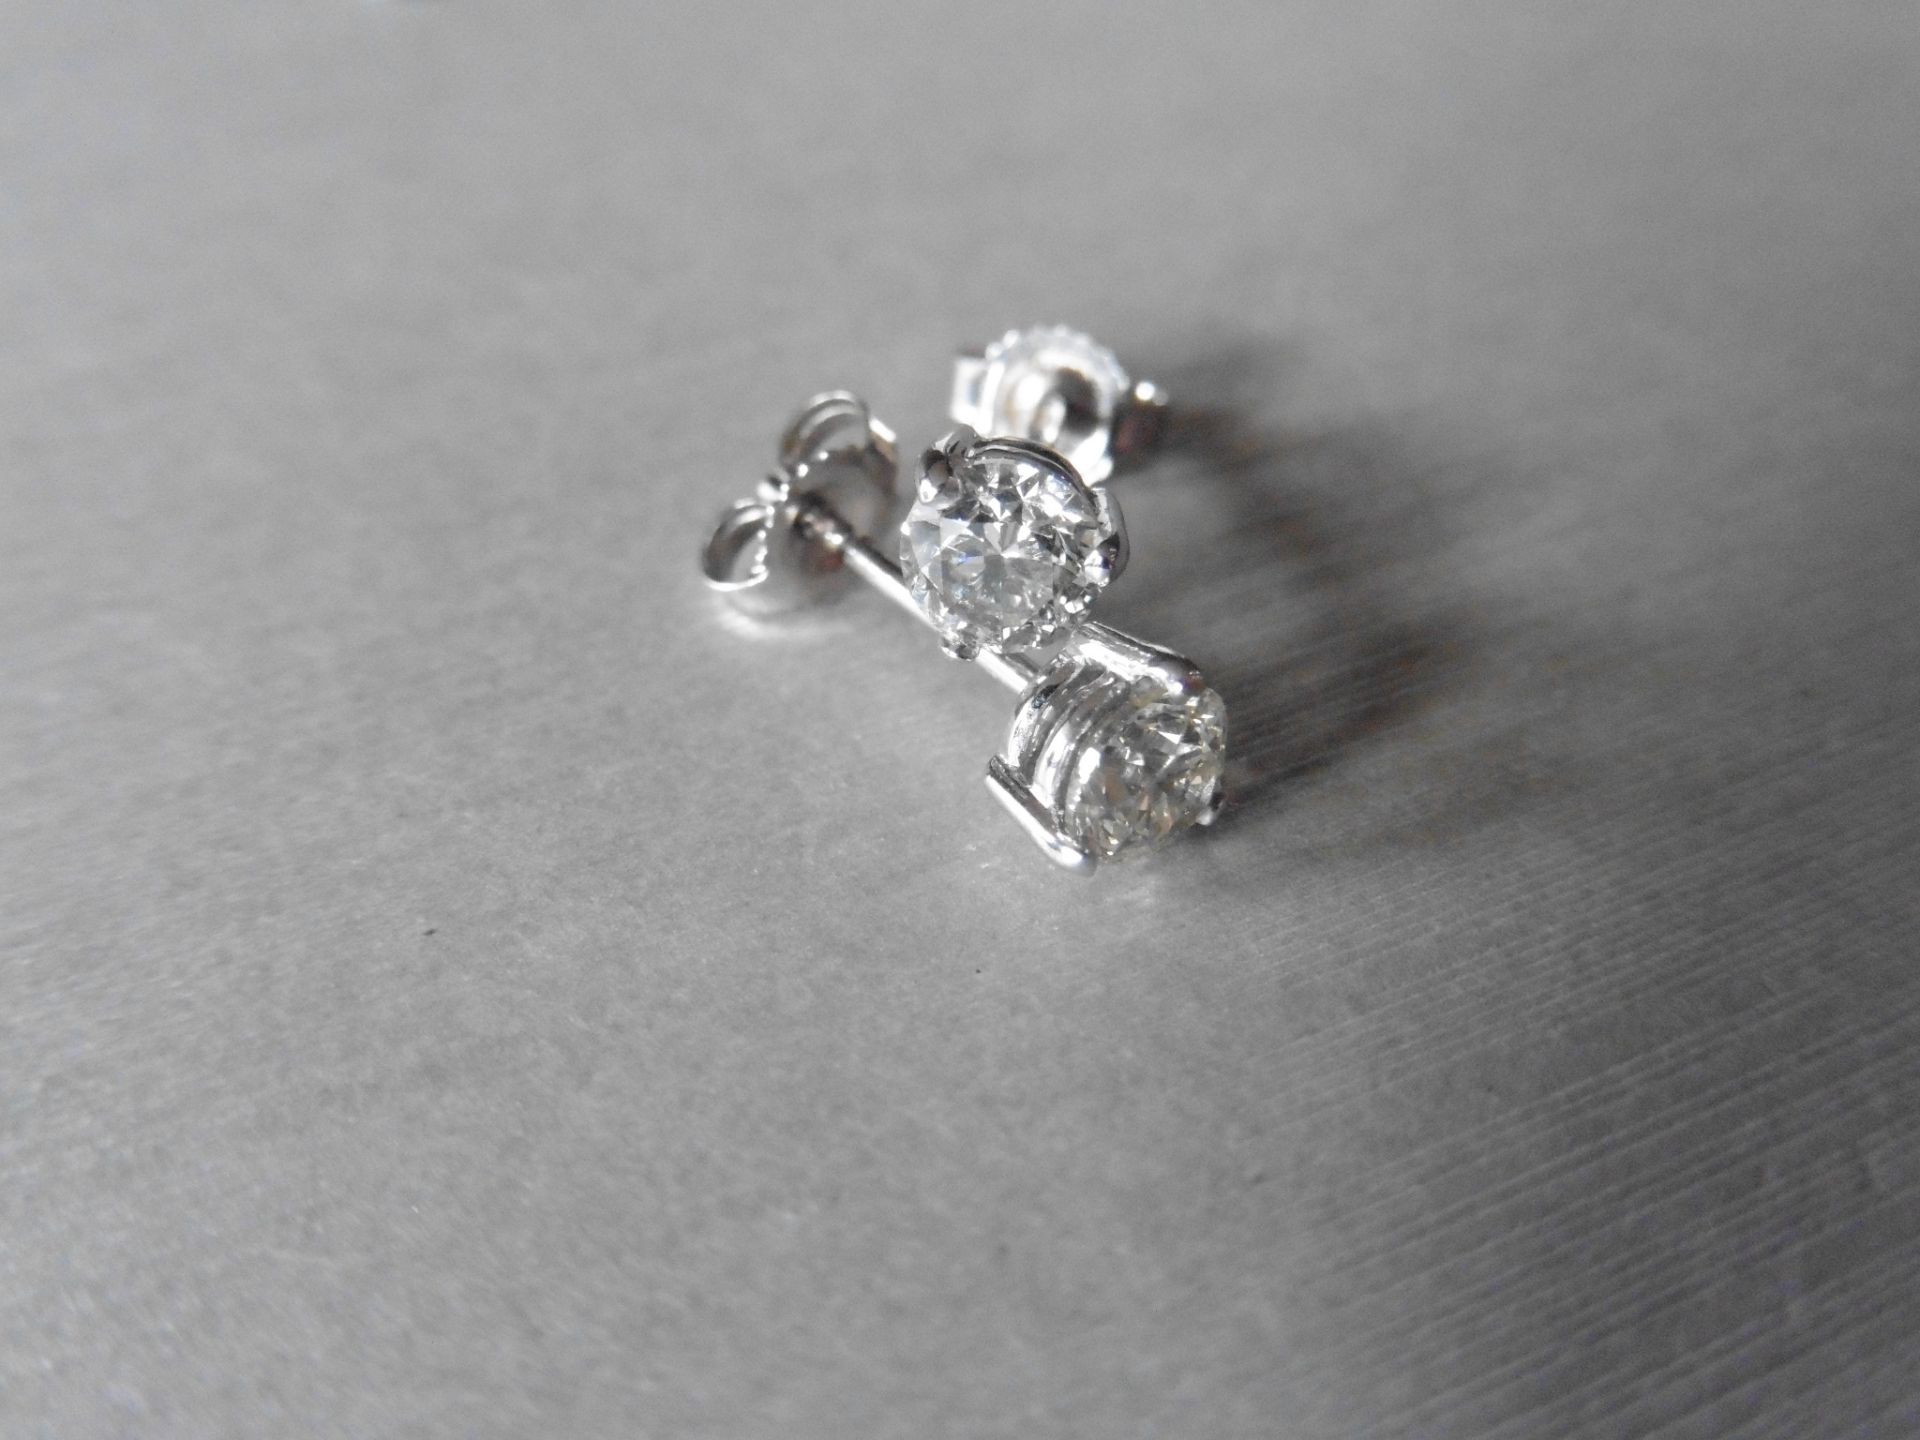 0.75ct Solitaire diamond stud earrings set with brilliant cut diamonds, SI2 clarity and I colour.